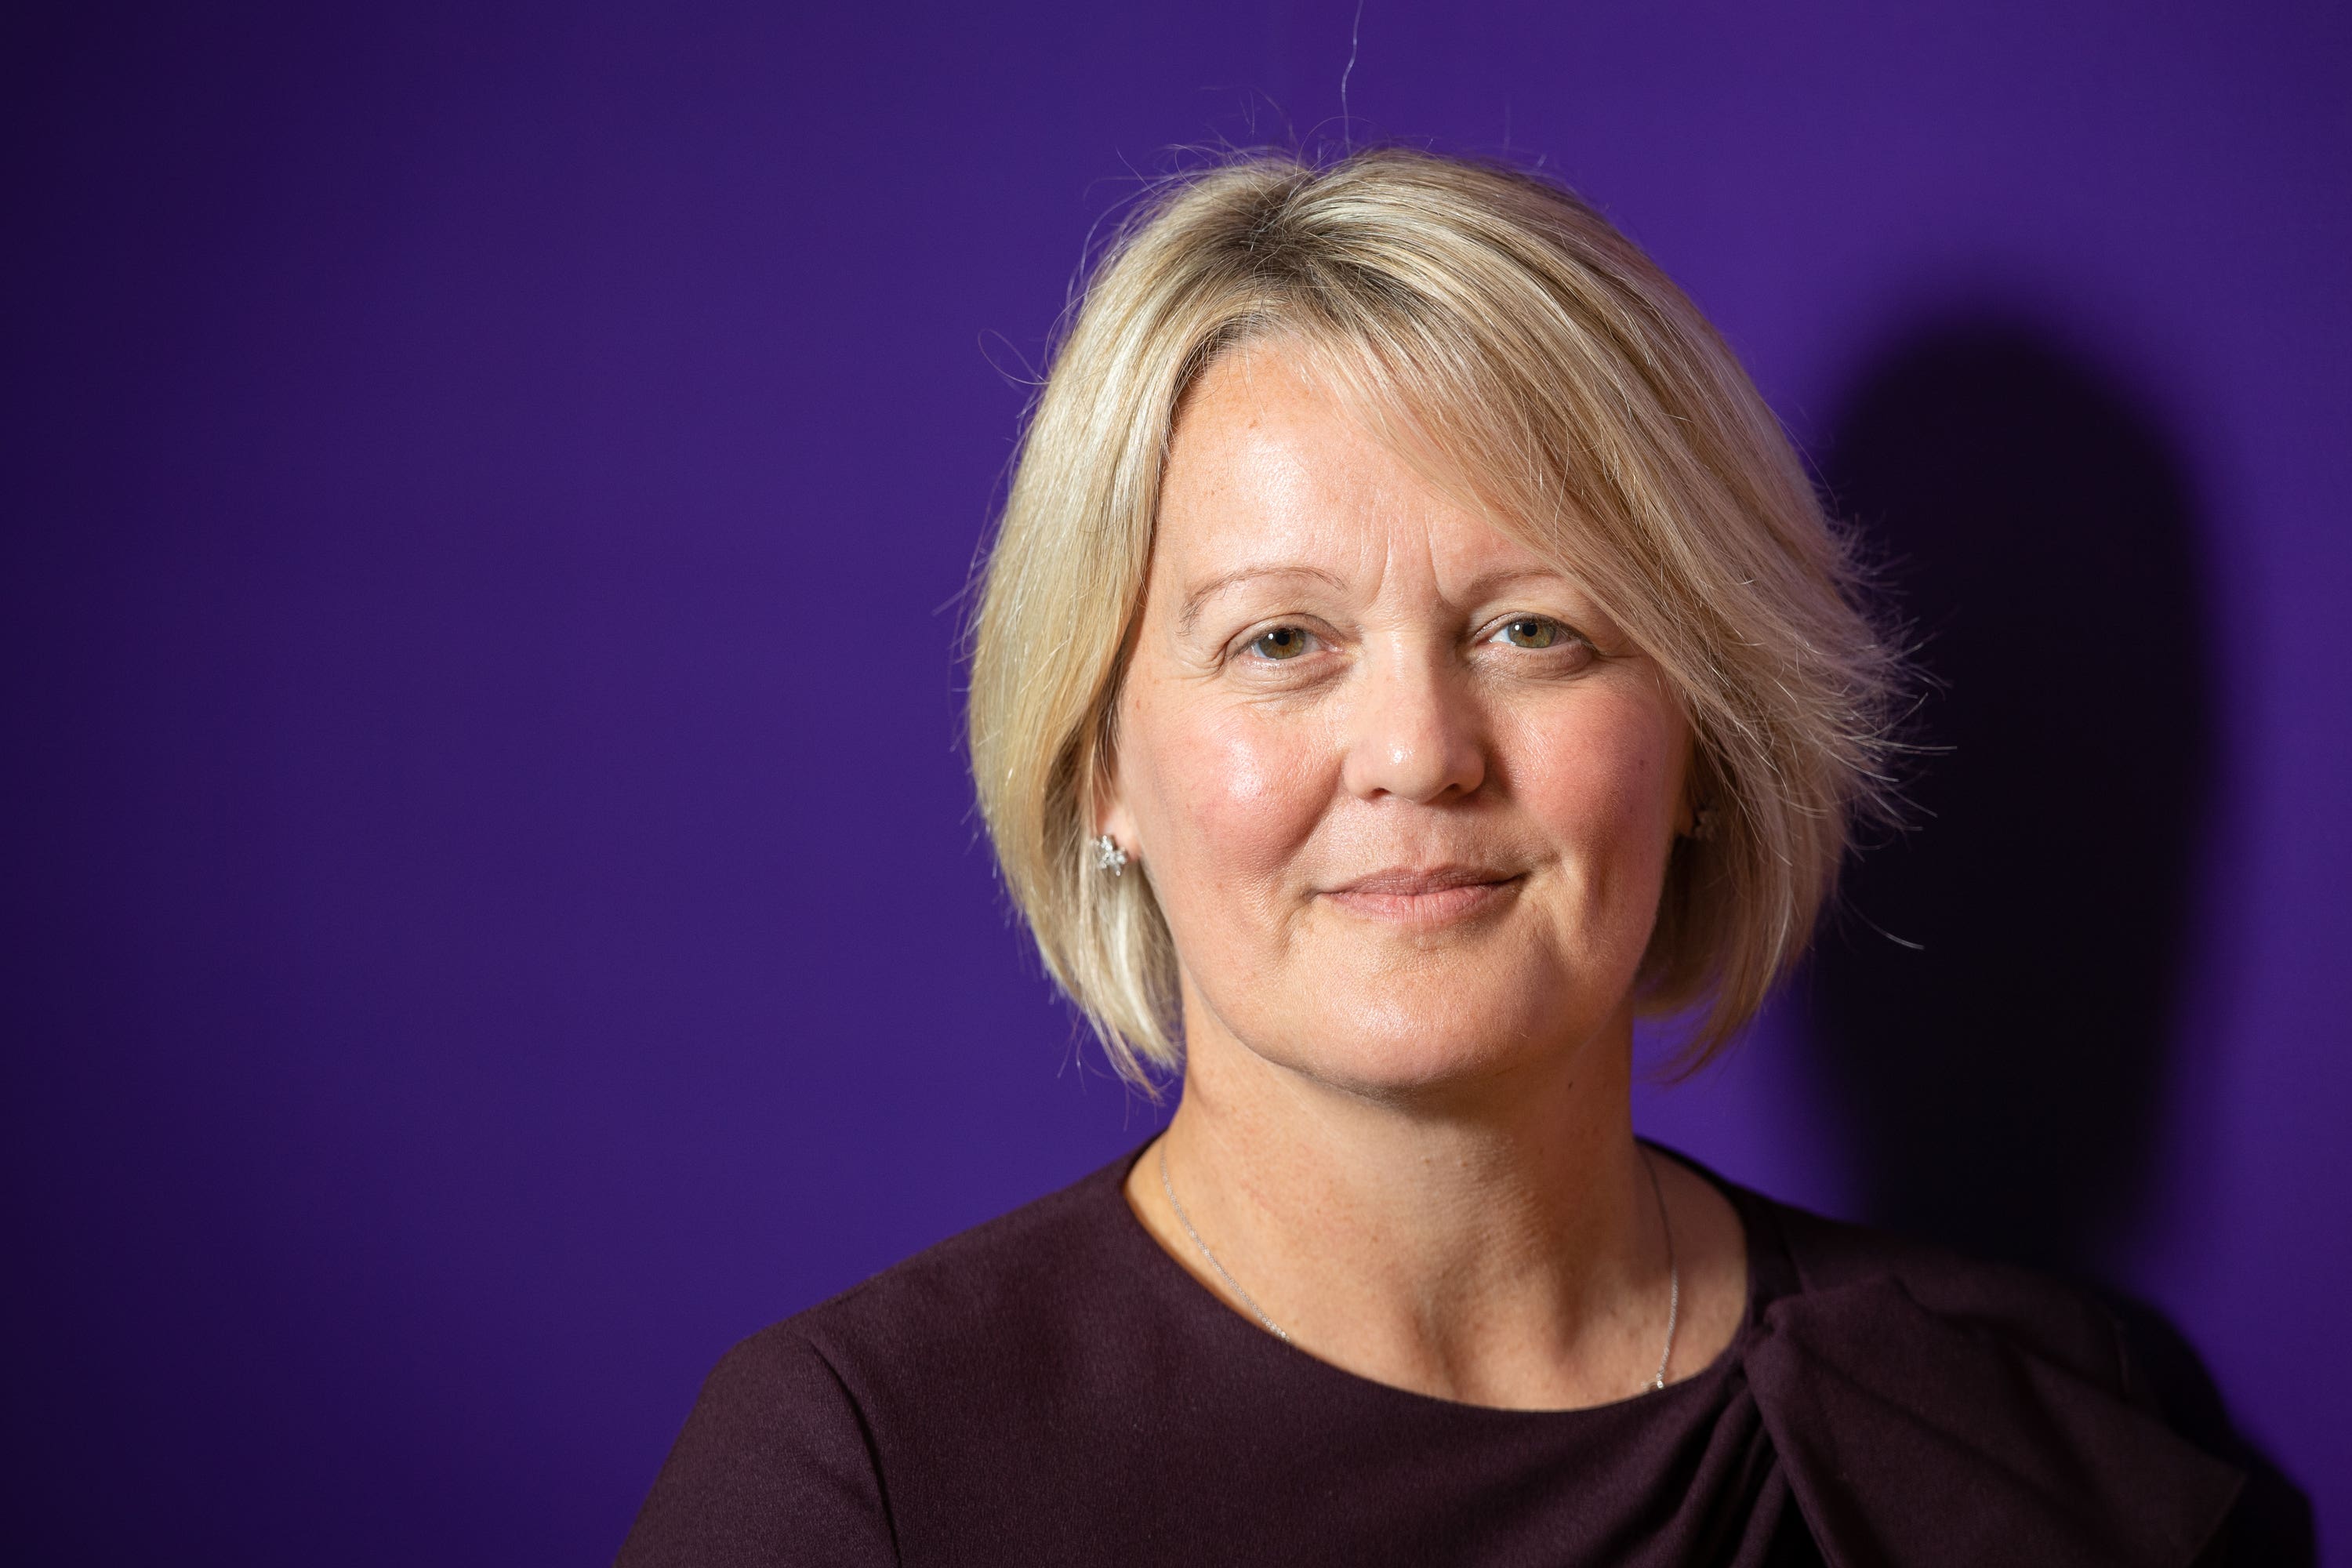 Dame Alison Rose, who resigned as chief executive of NatWest last month